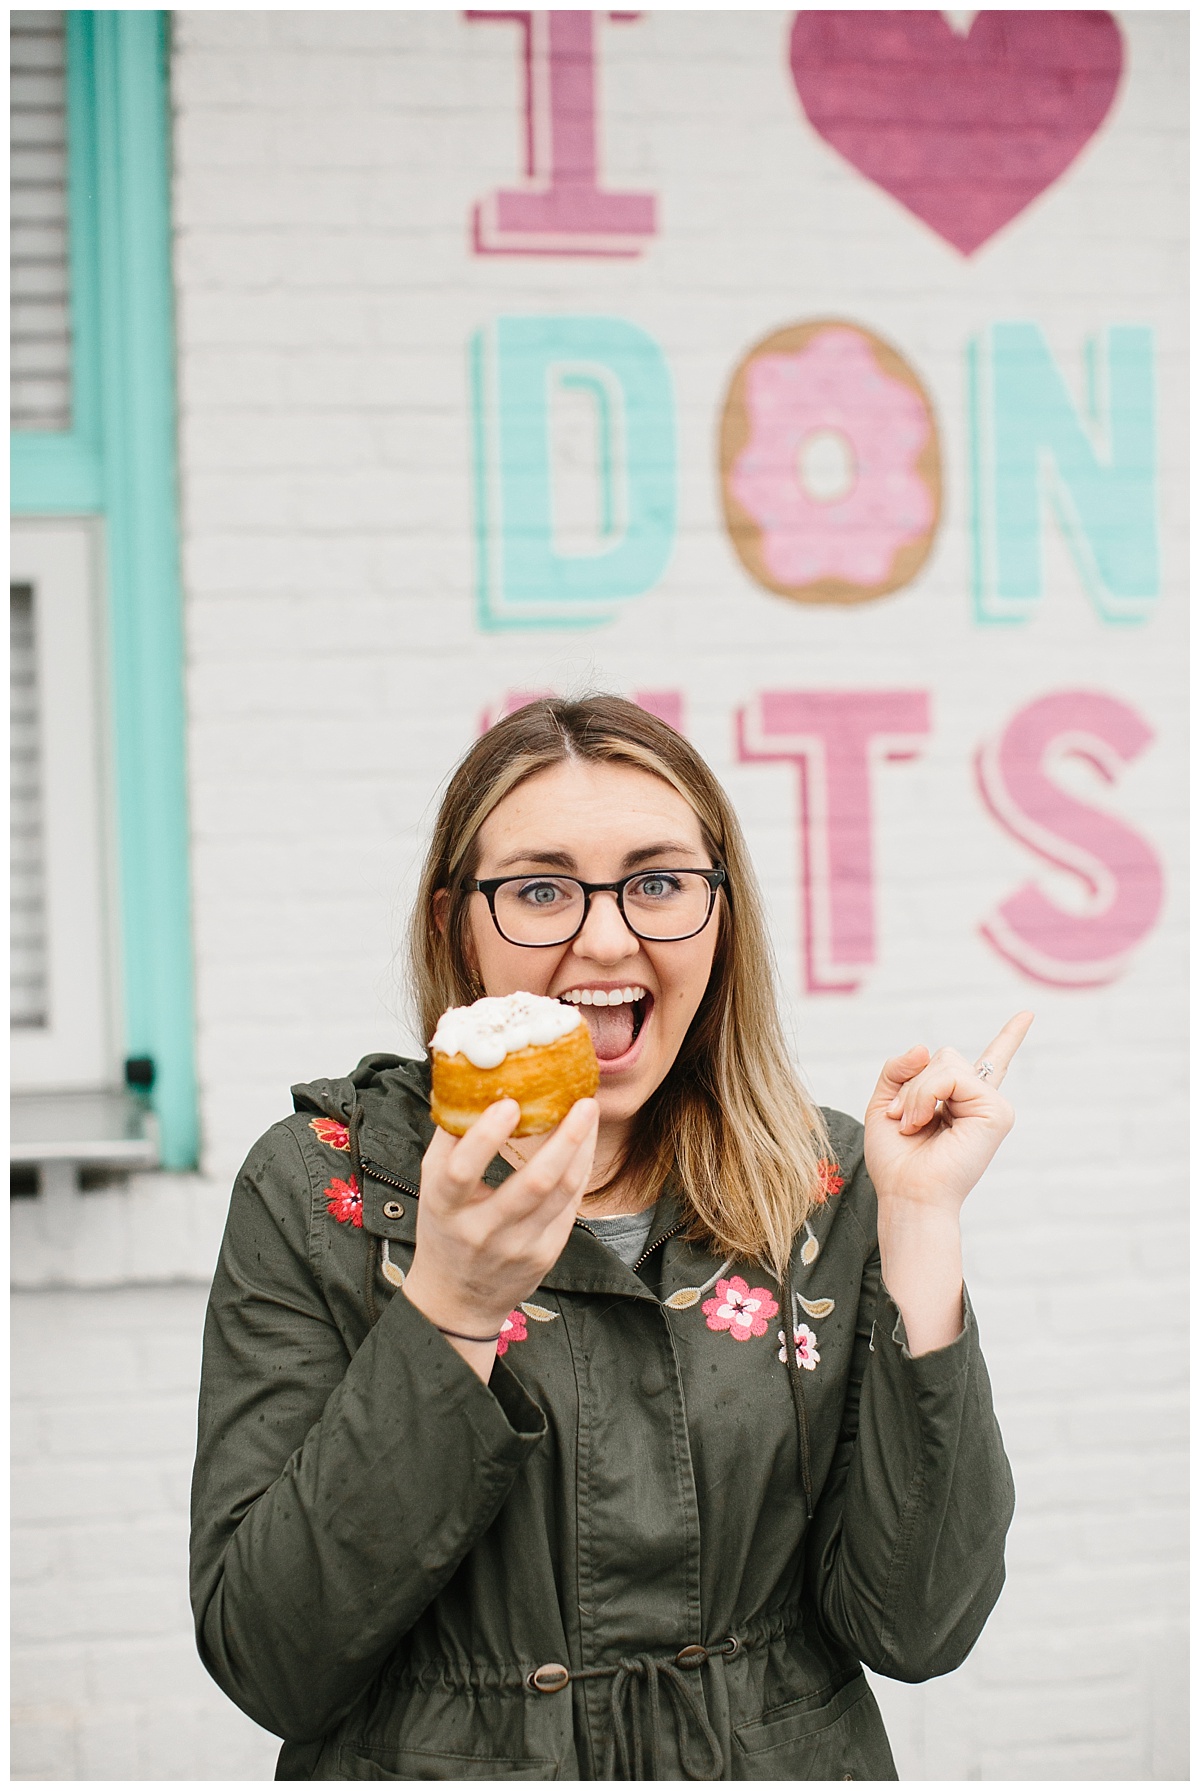 Nashville, Alysa Rene Photography, Rainy, Weekend, Winter, Downtown, Tennesee, Tourism, Itinerary, Broadway, Five Daughters Bakery, Donut, Cronut